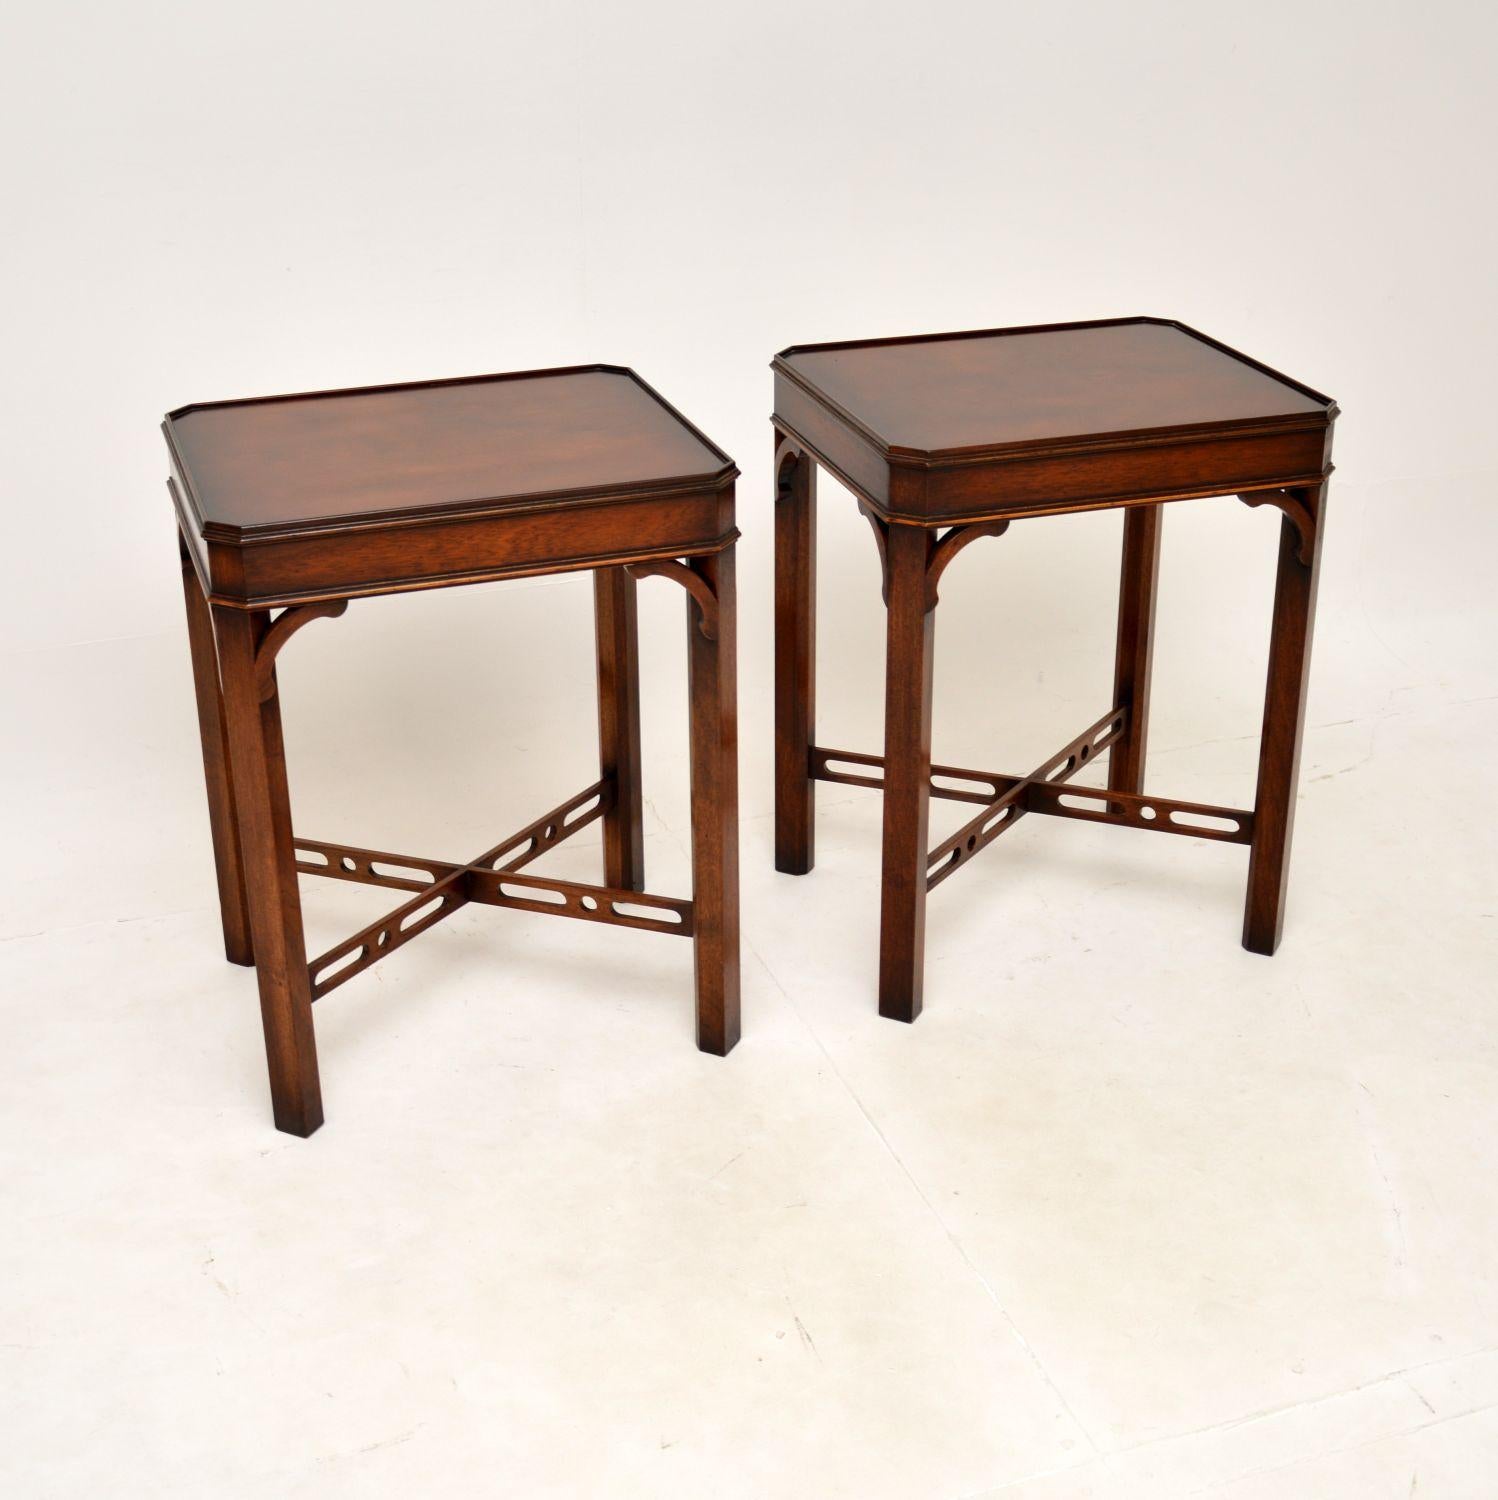 Mid-20th Century Pair of Antique Georgian Style Side Tables